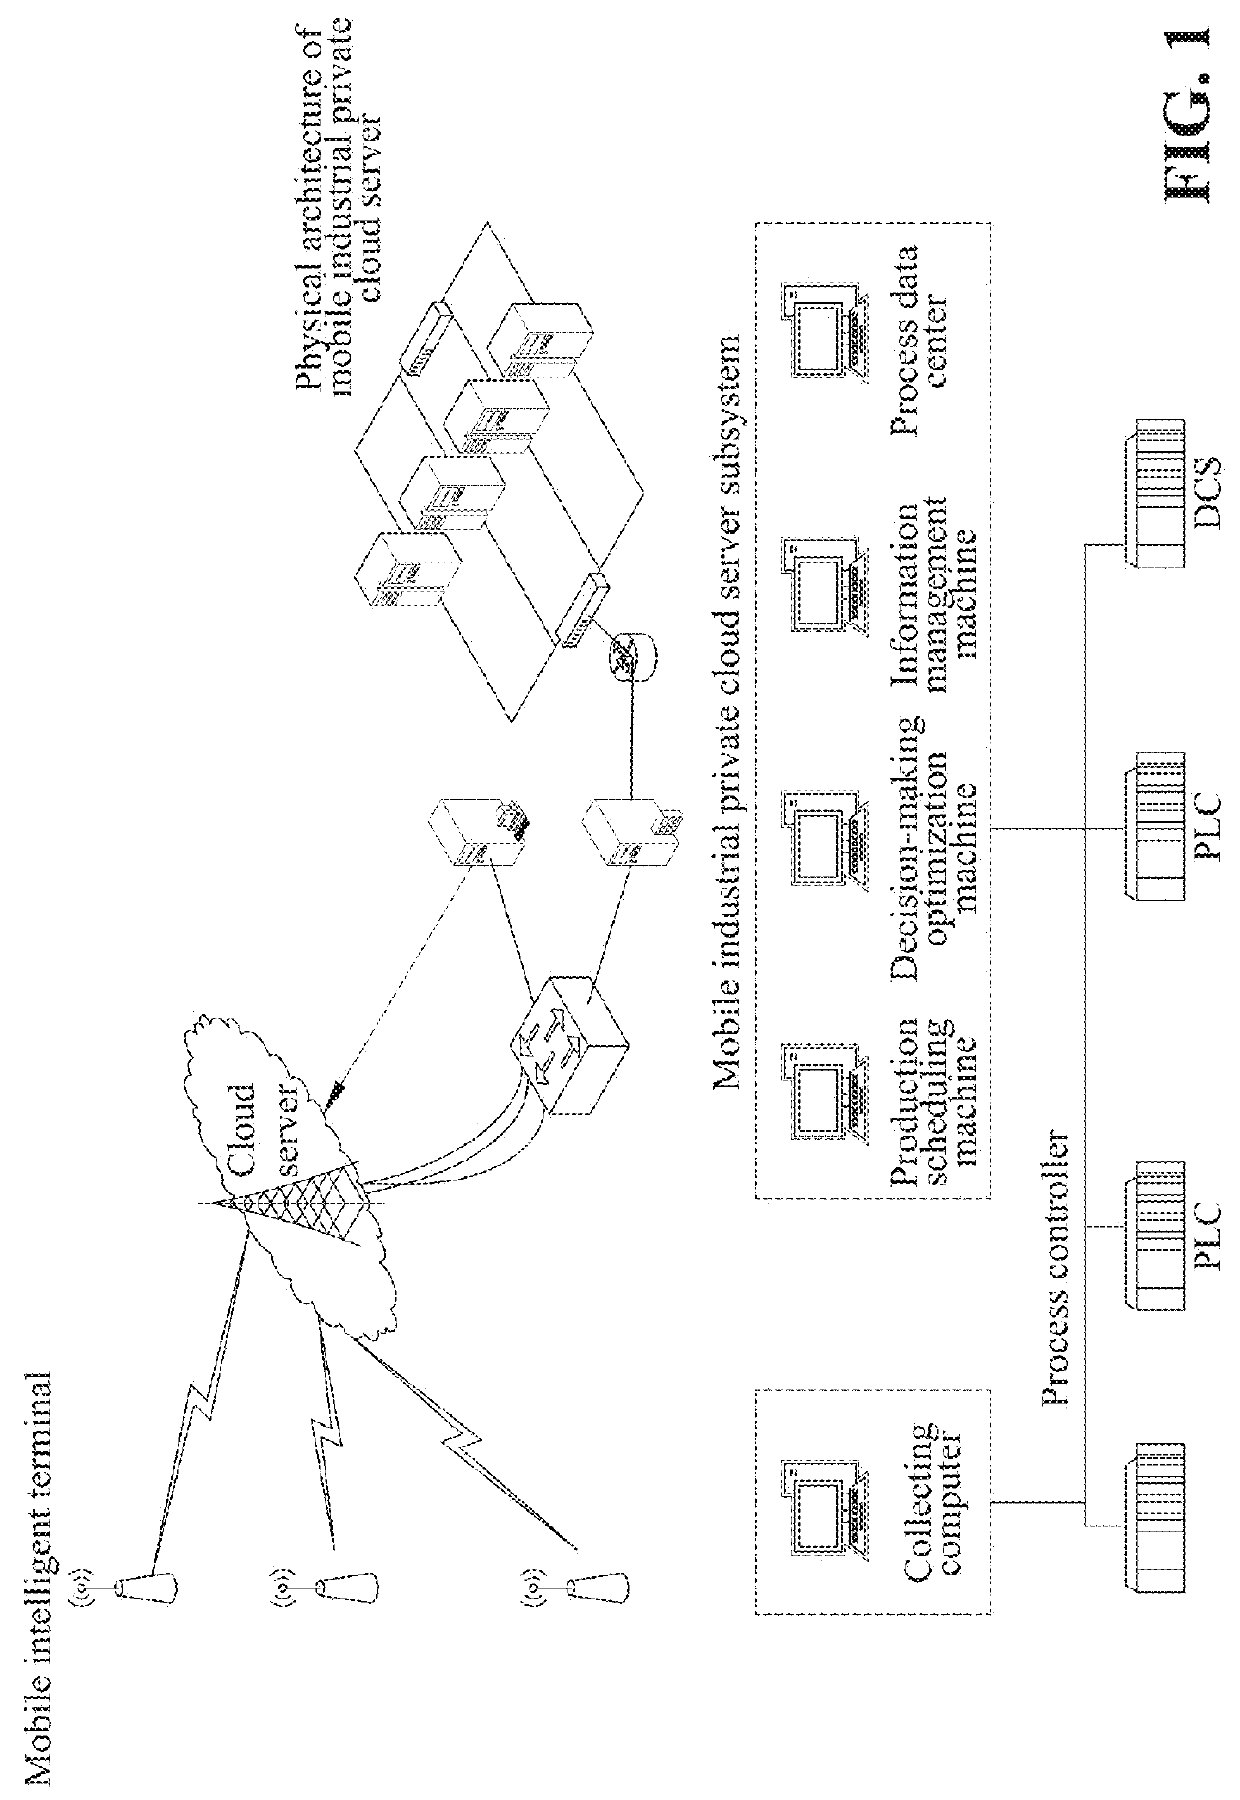 Optimized decision-making system and method for multiple ore dressing production indexes based on cloud server and mobile terminals